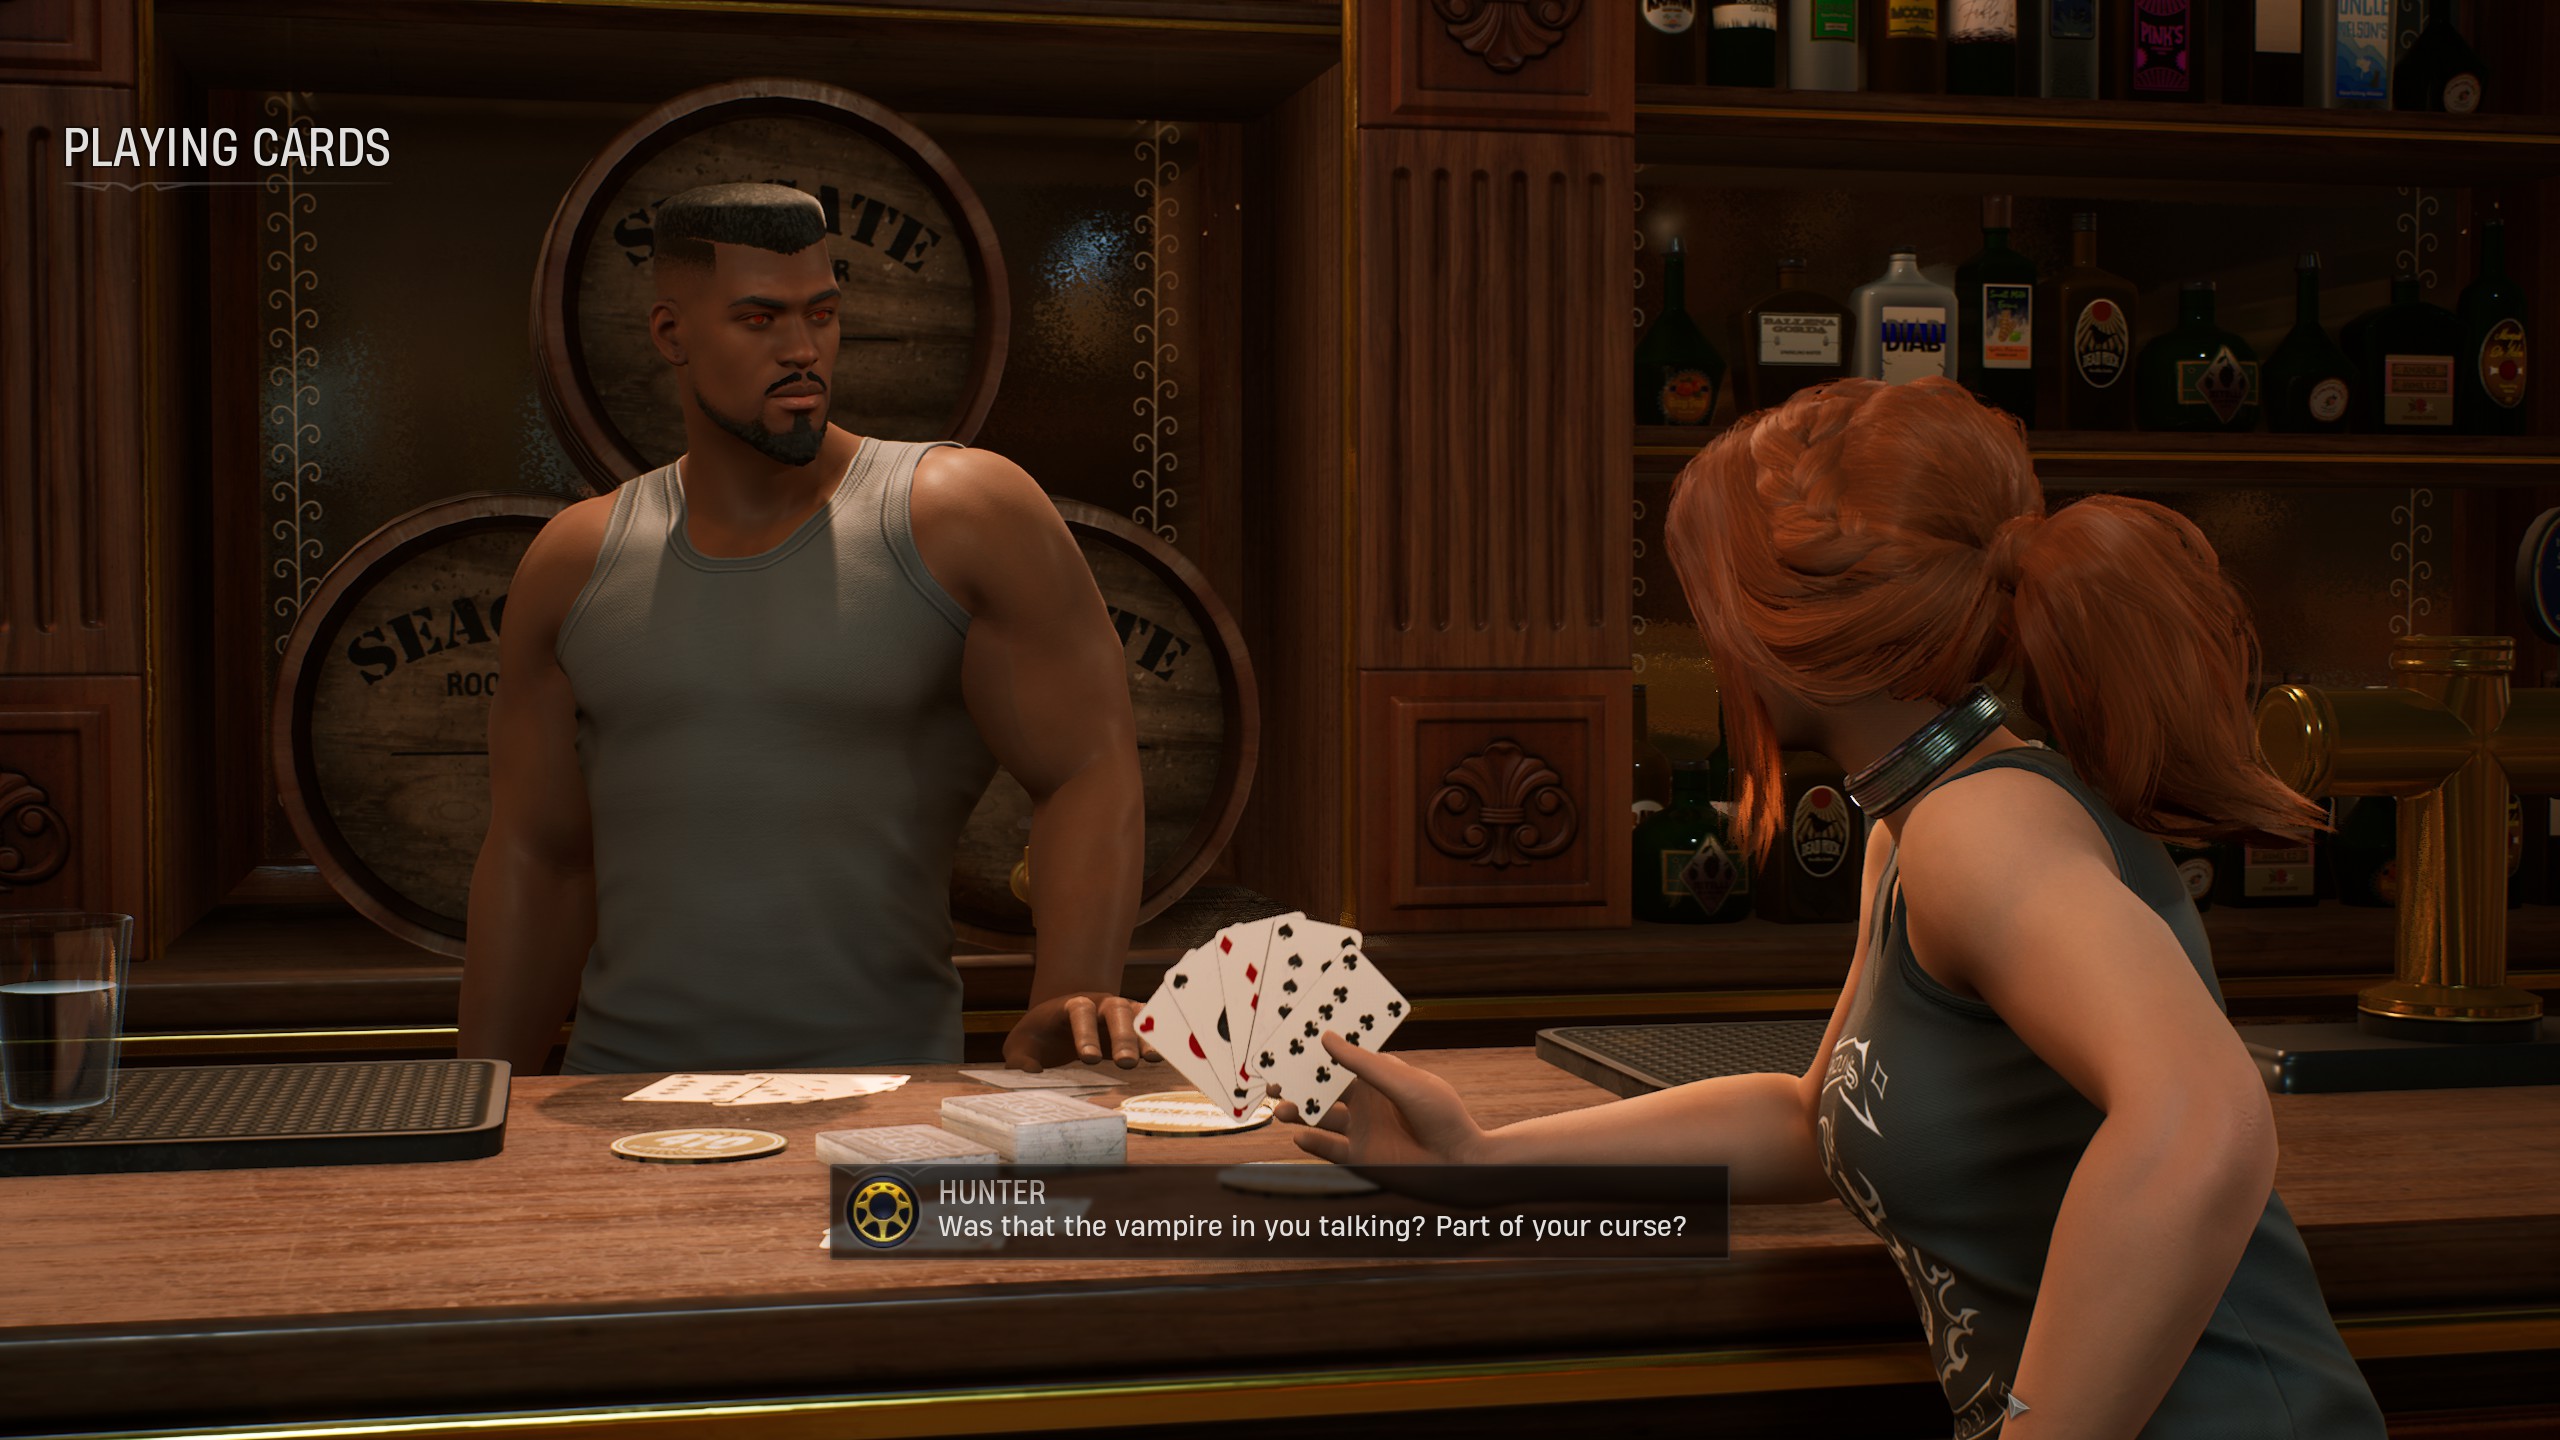 The Hunter and Blade playing cards.